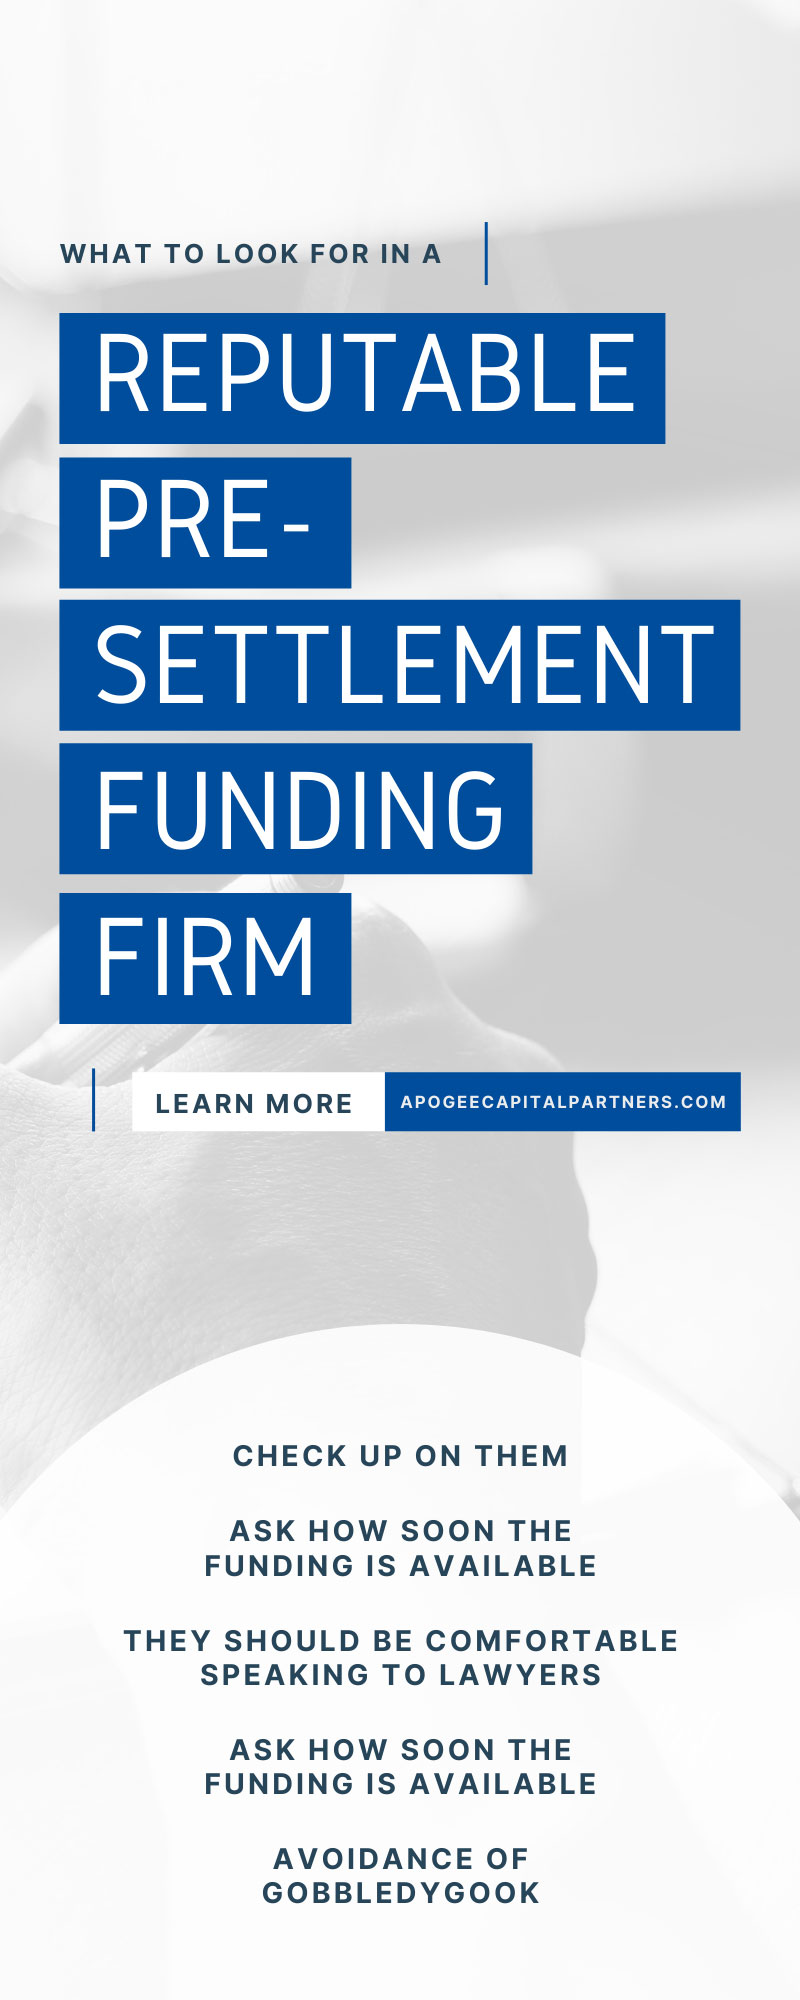 What To Look for in a Reputable Pre-Settlement Funding Firm